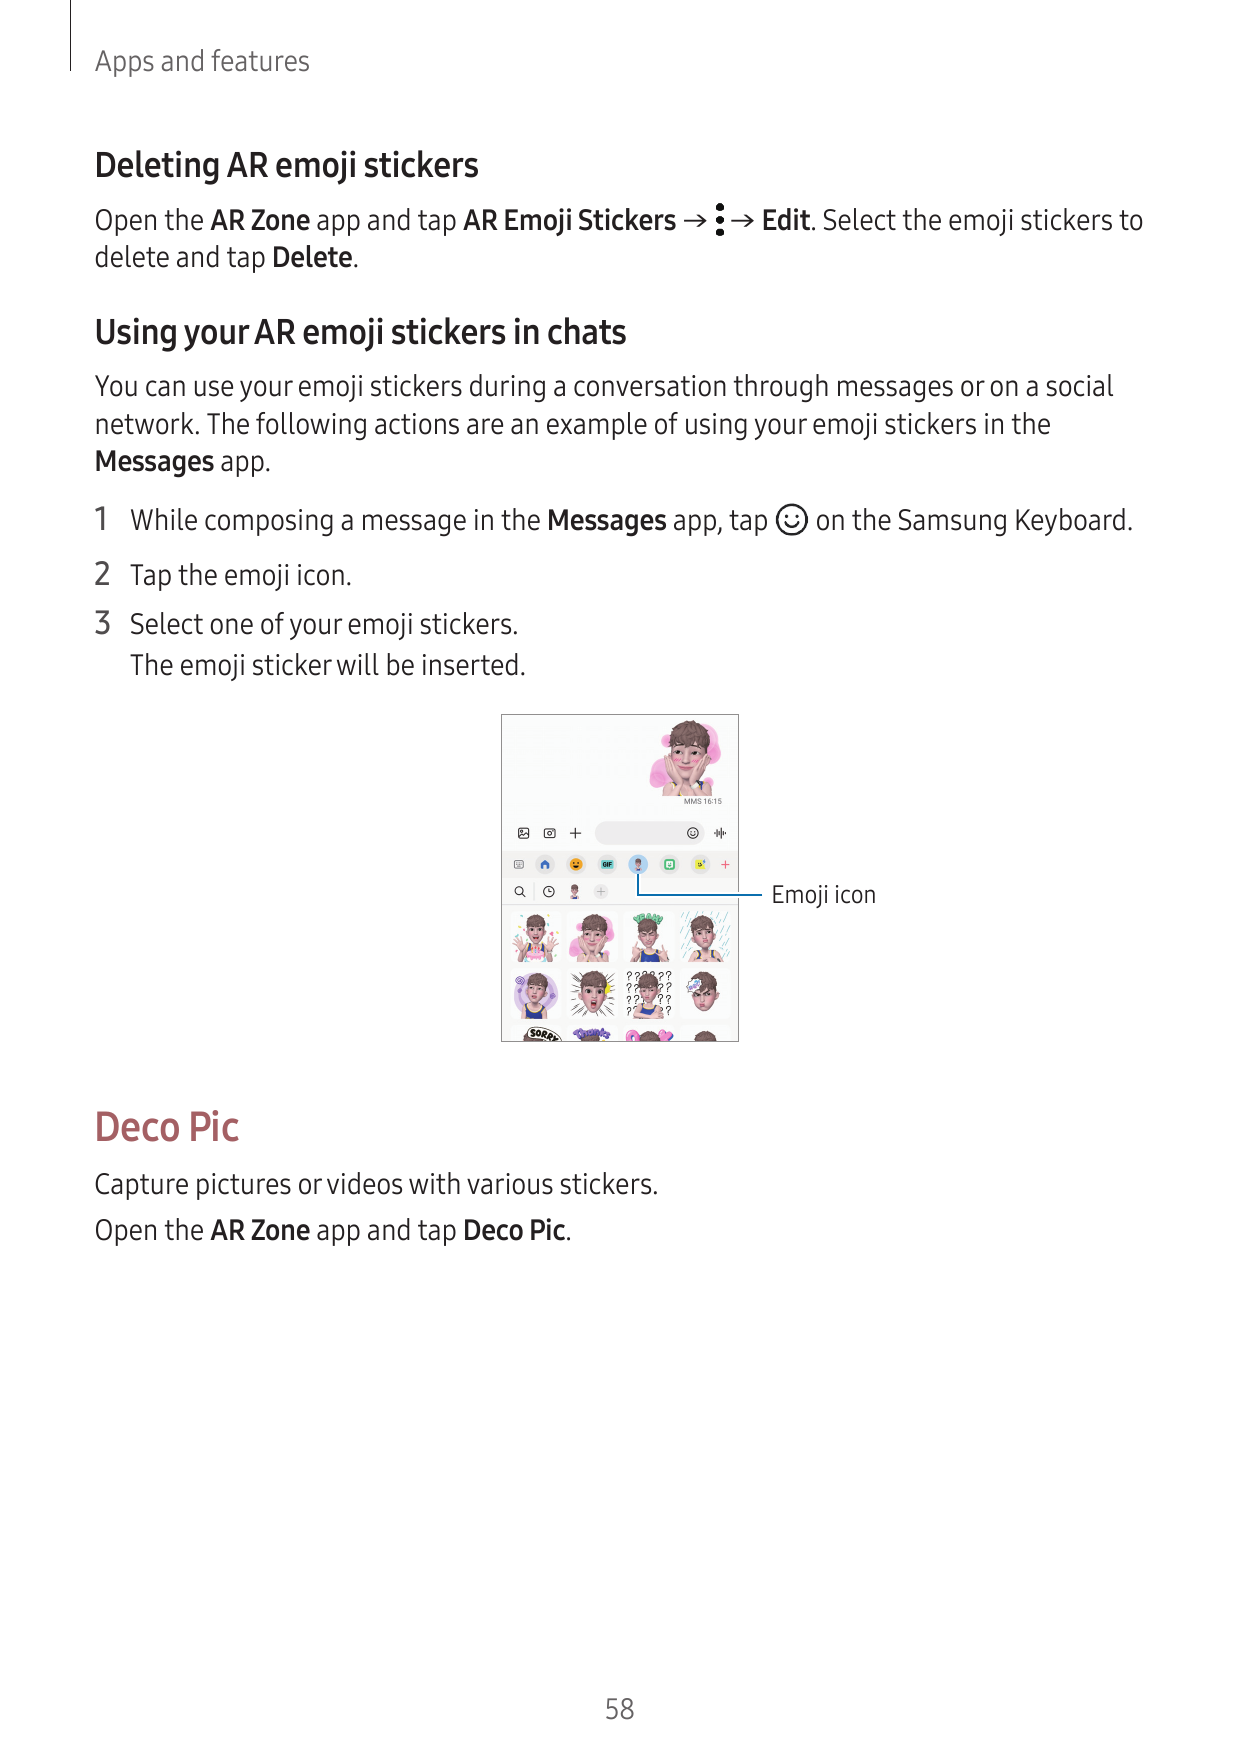 Apps and featuresDeleting AR emoji stickersOpen the AR Zone app and tap AR Emoji Stickers → → Edit. Select the emoji stickers to